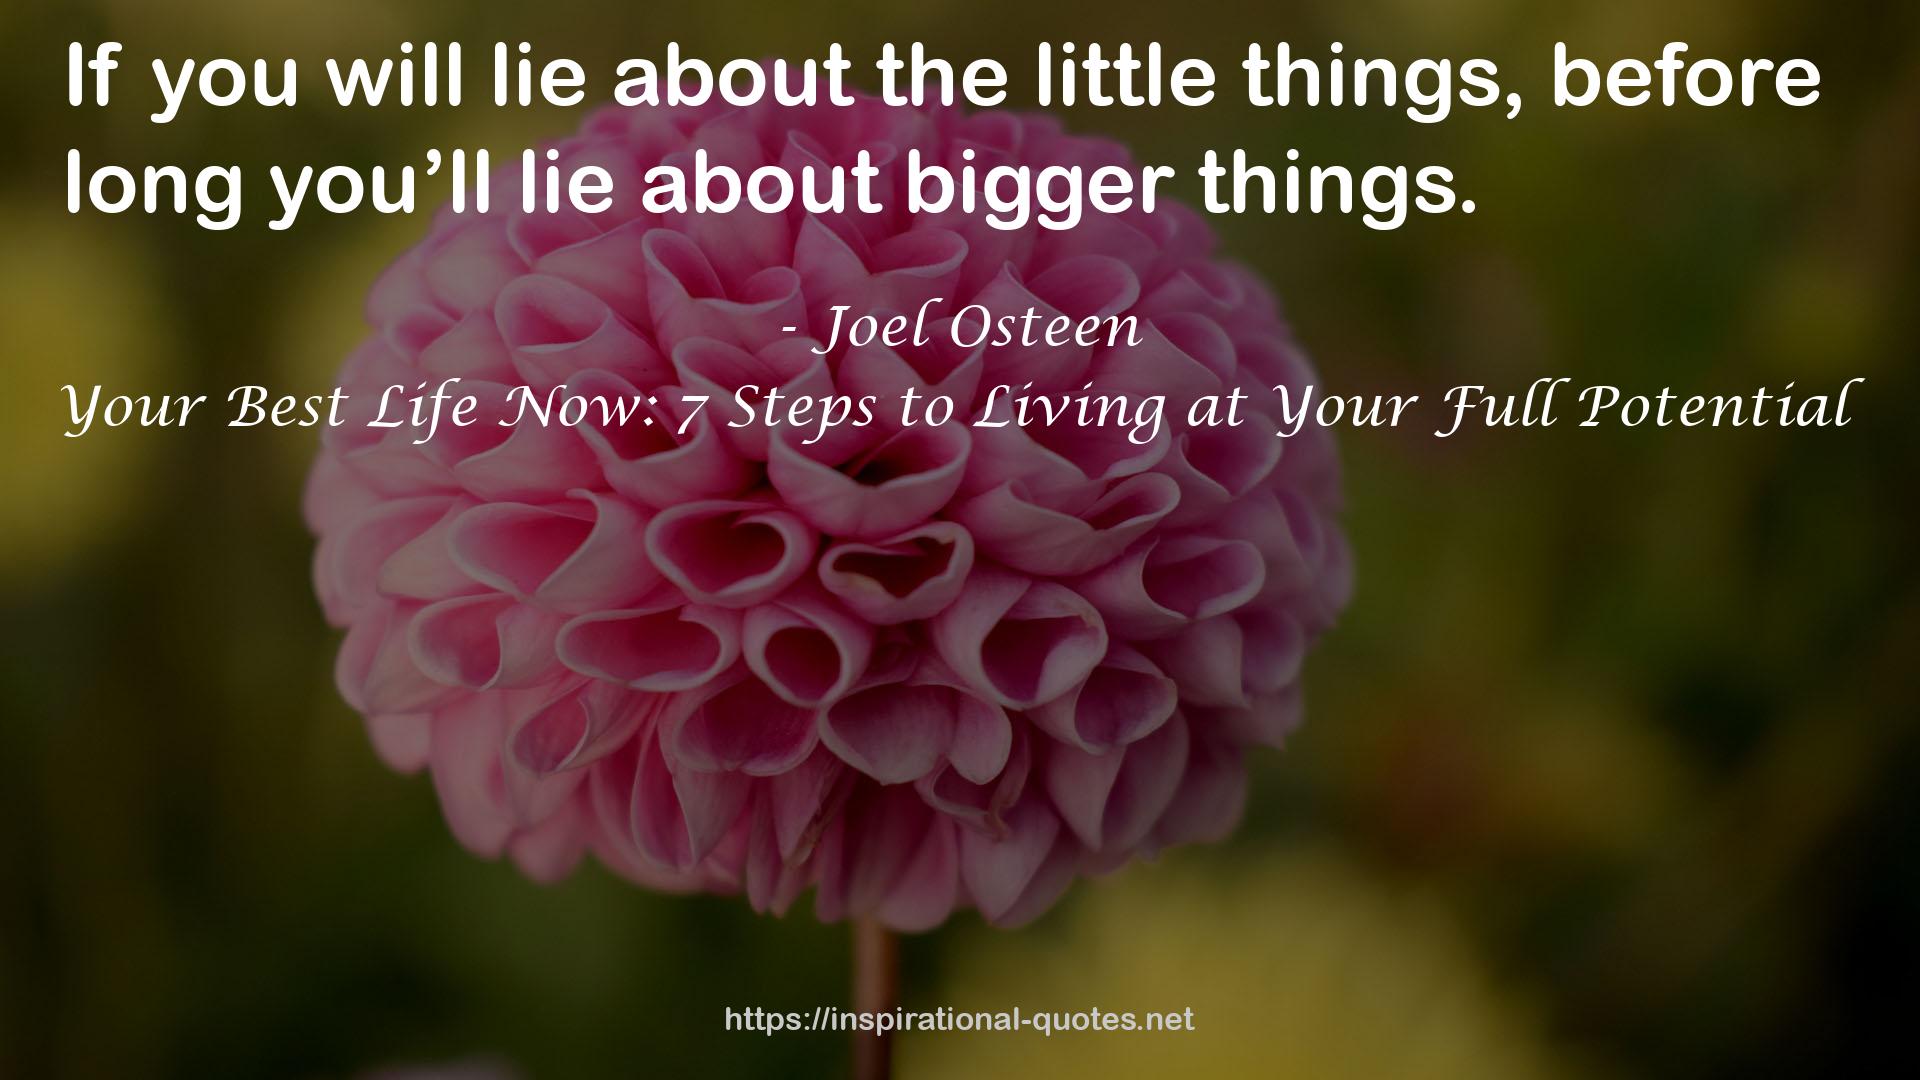 Your Best Life Now: 7 Steps to Living at Your Full Potential QUOTES